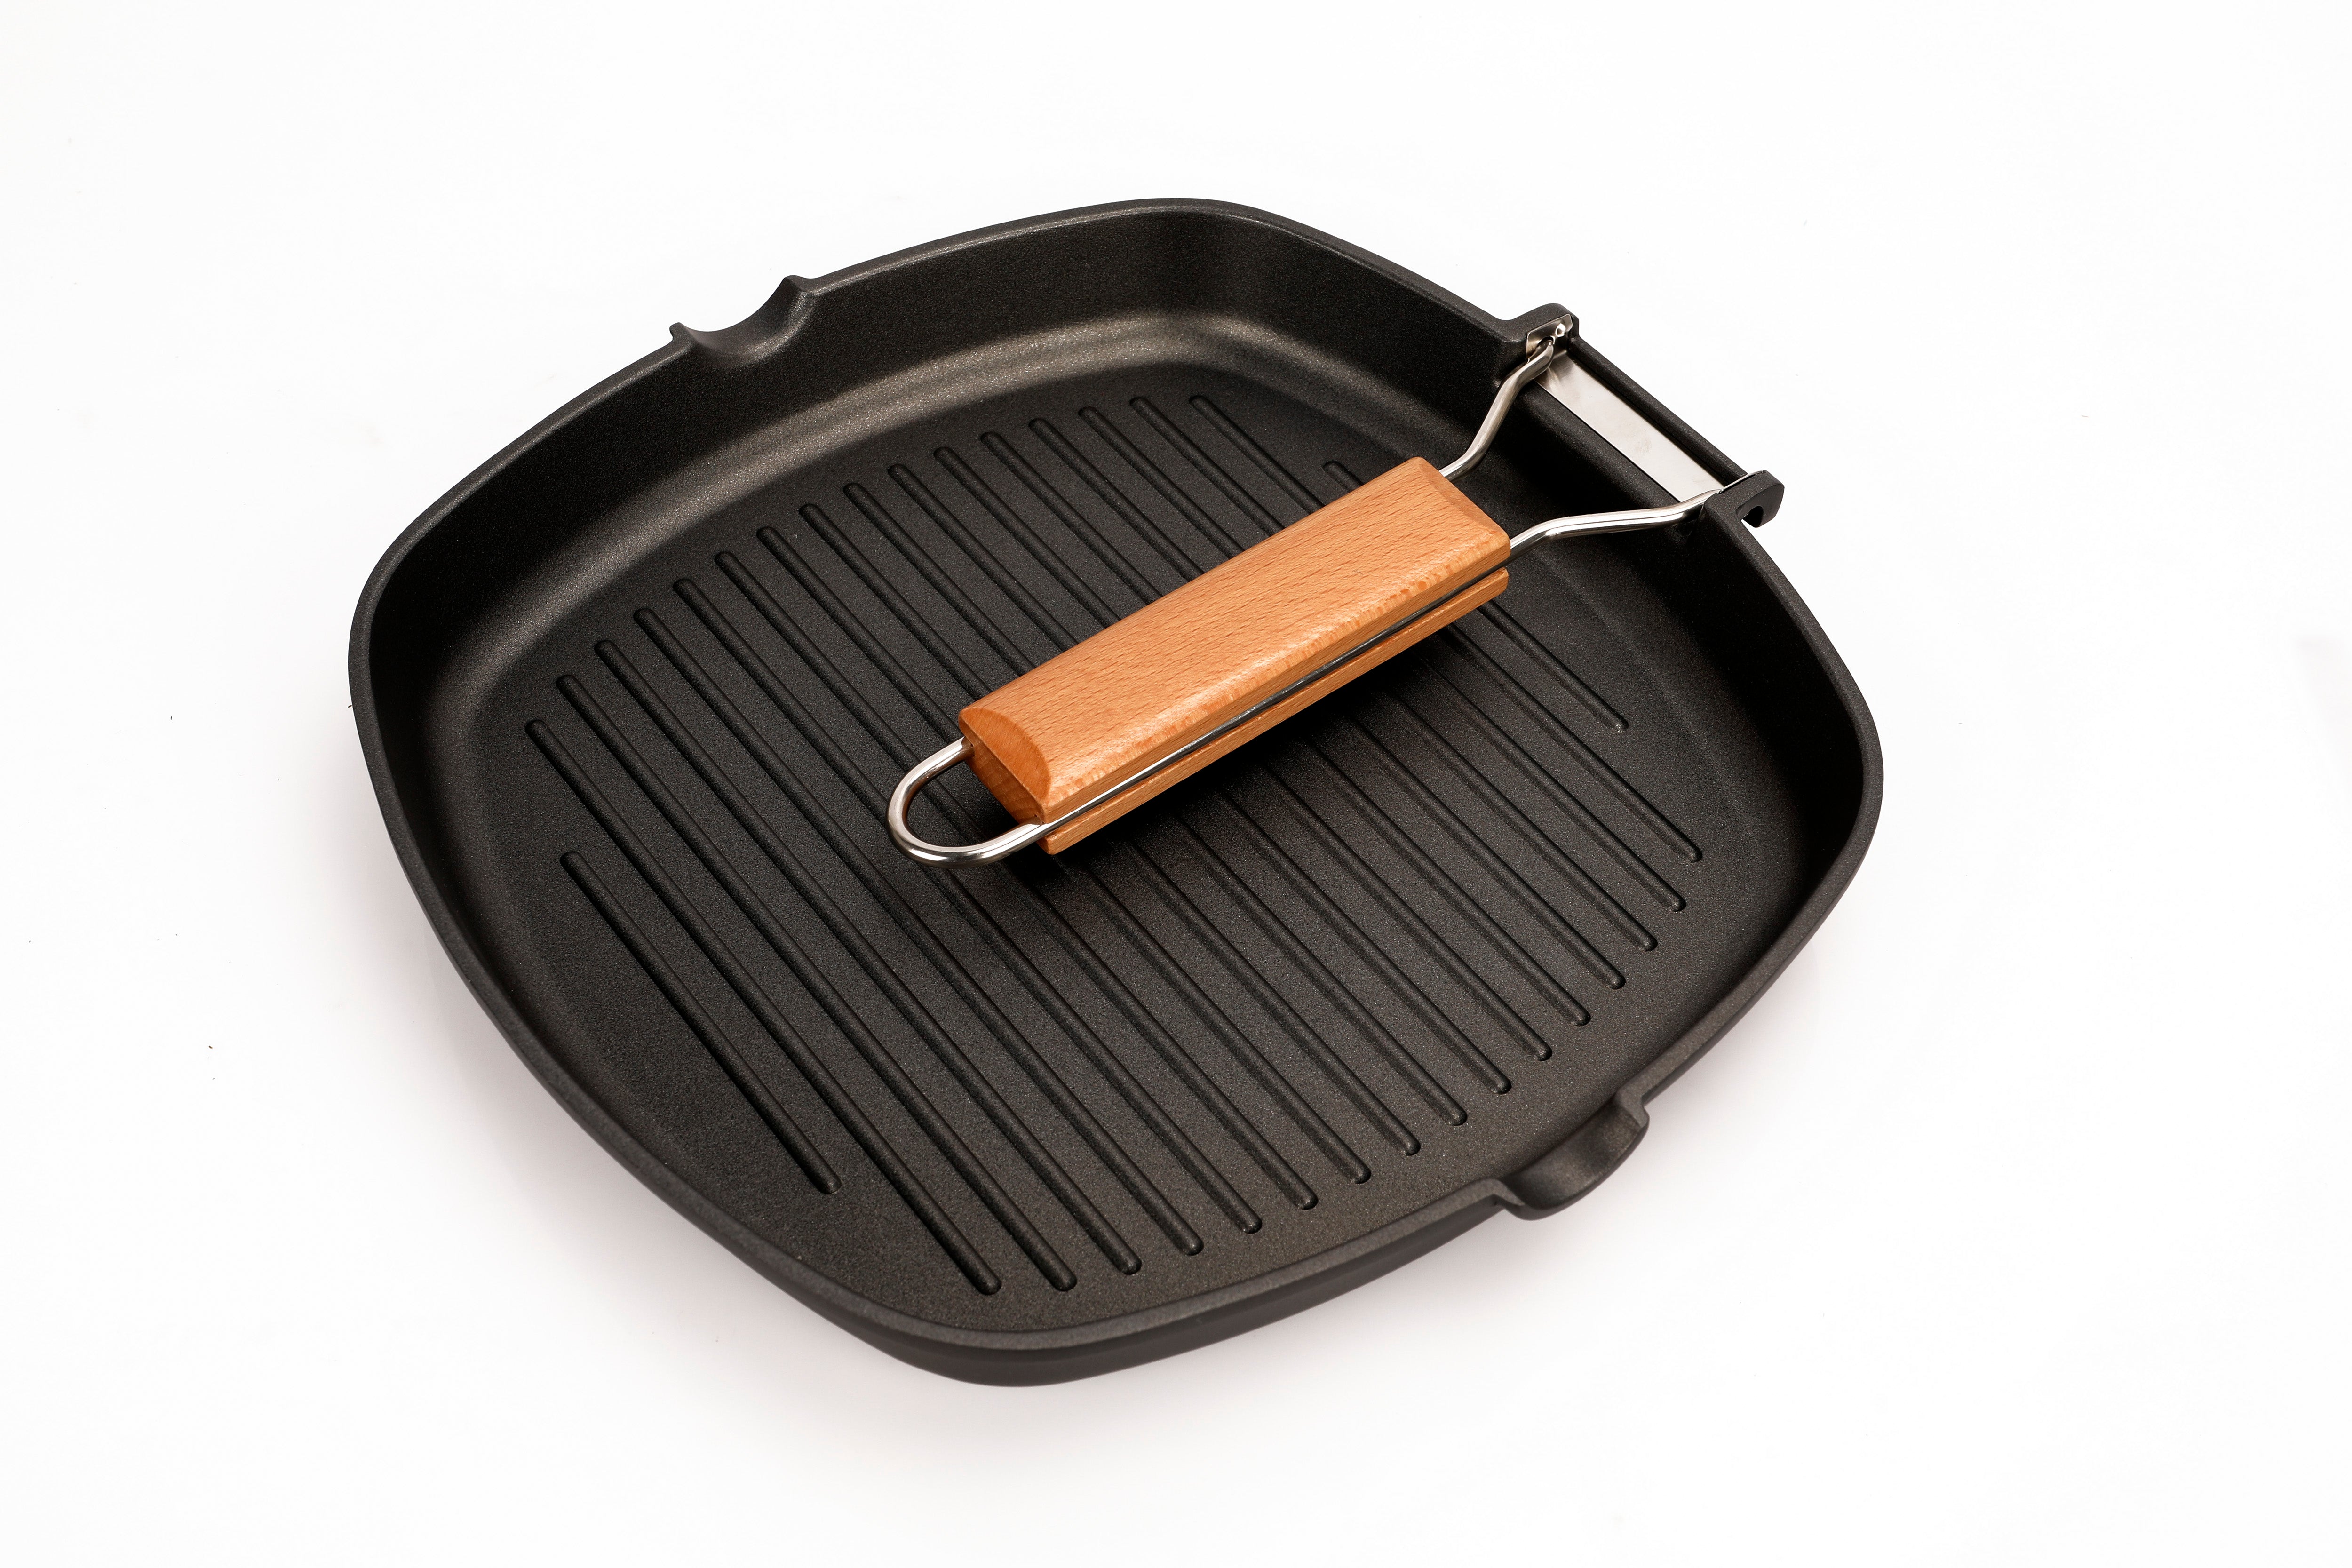 MASTERPAN Nonstick Grill Pan with Folding Handle, 8